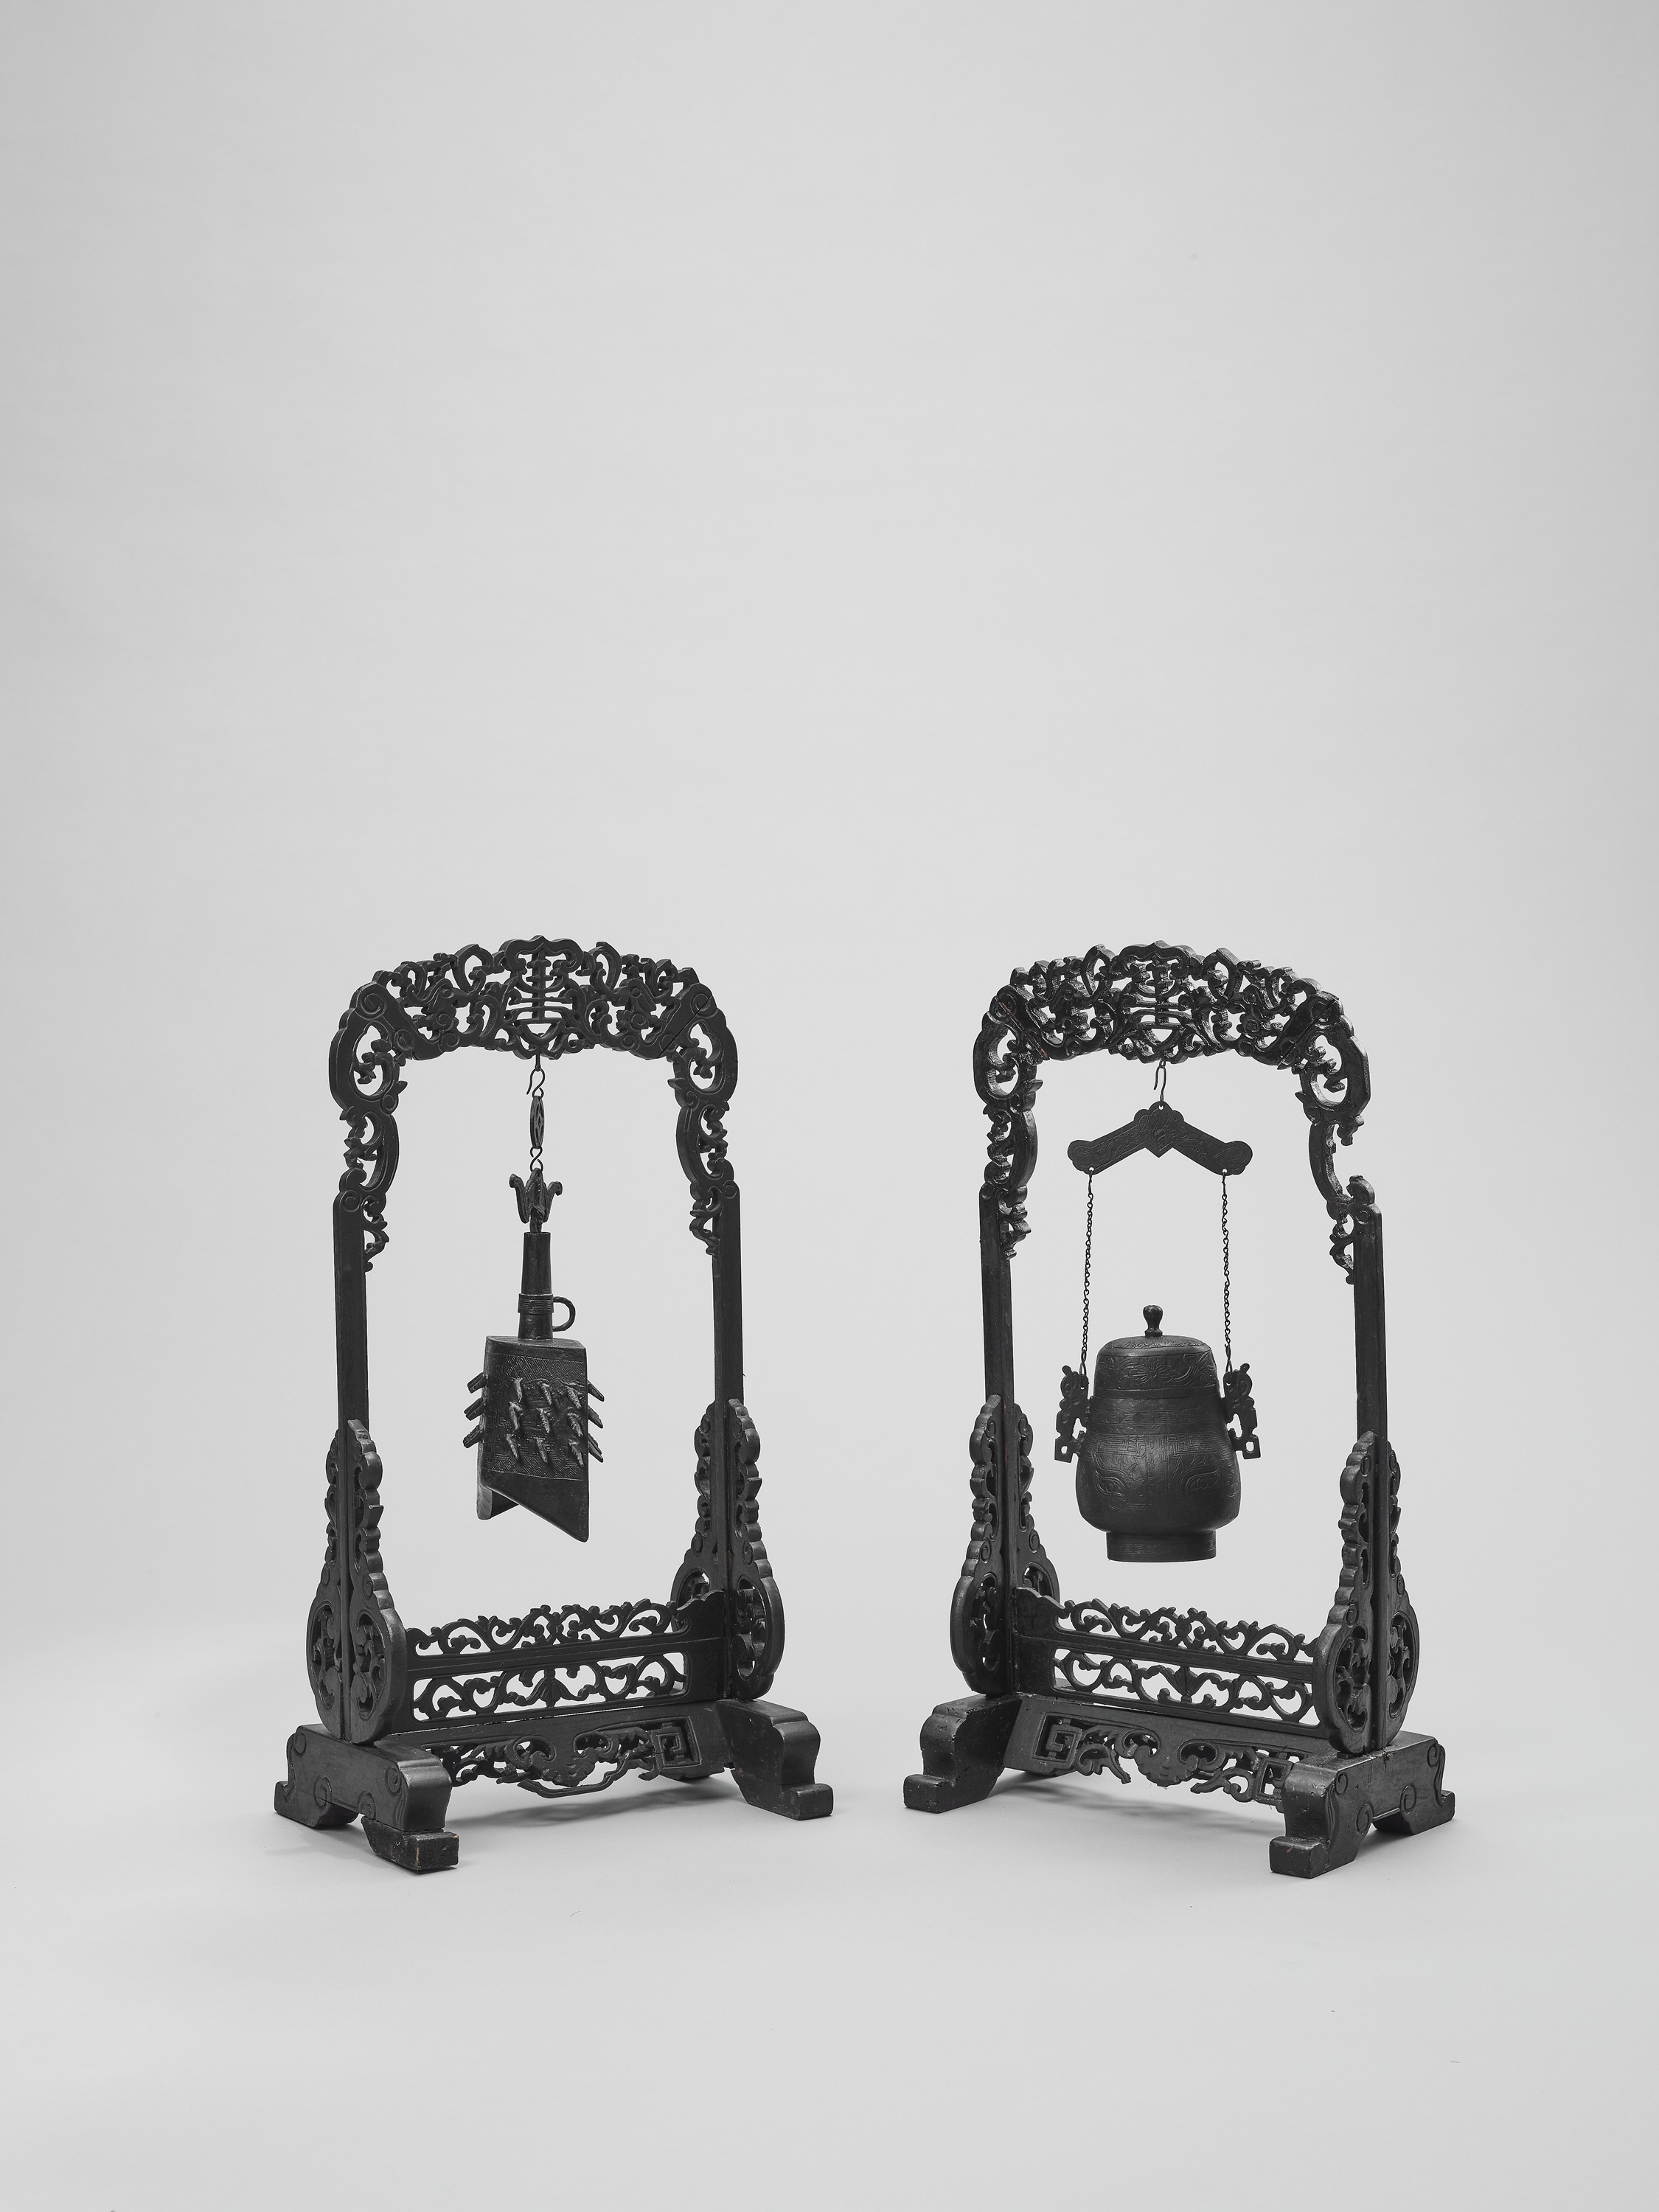 AN ARCHAISTIC BRONZE TEMPLE BELL AND VESSEL SUSPENDED IN HARDWOOD FRAMES AND STANDS, QING - Image 5 of 6